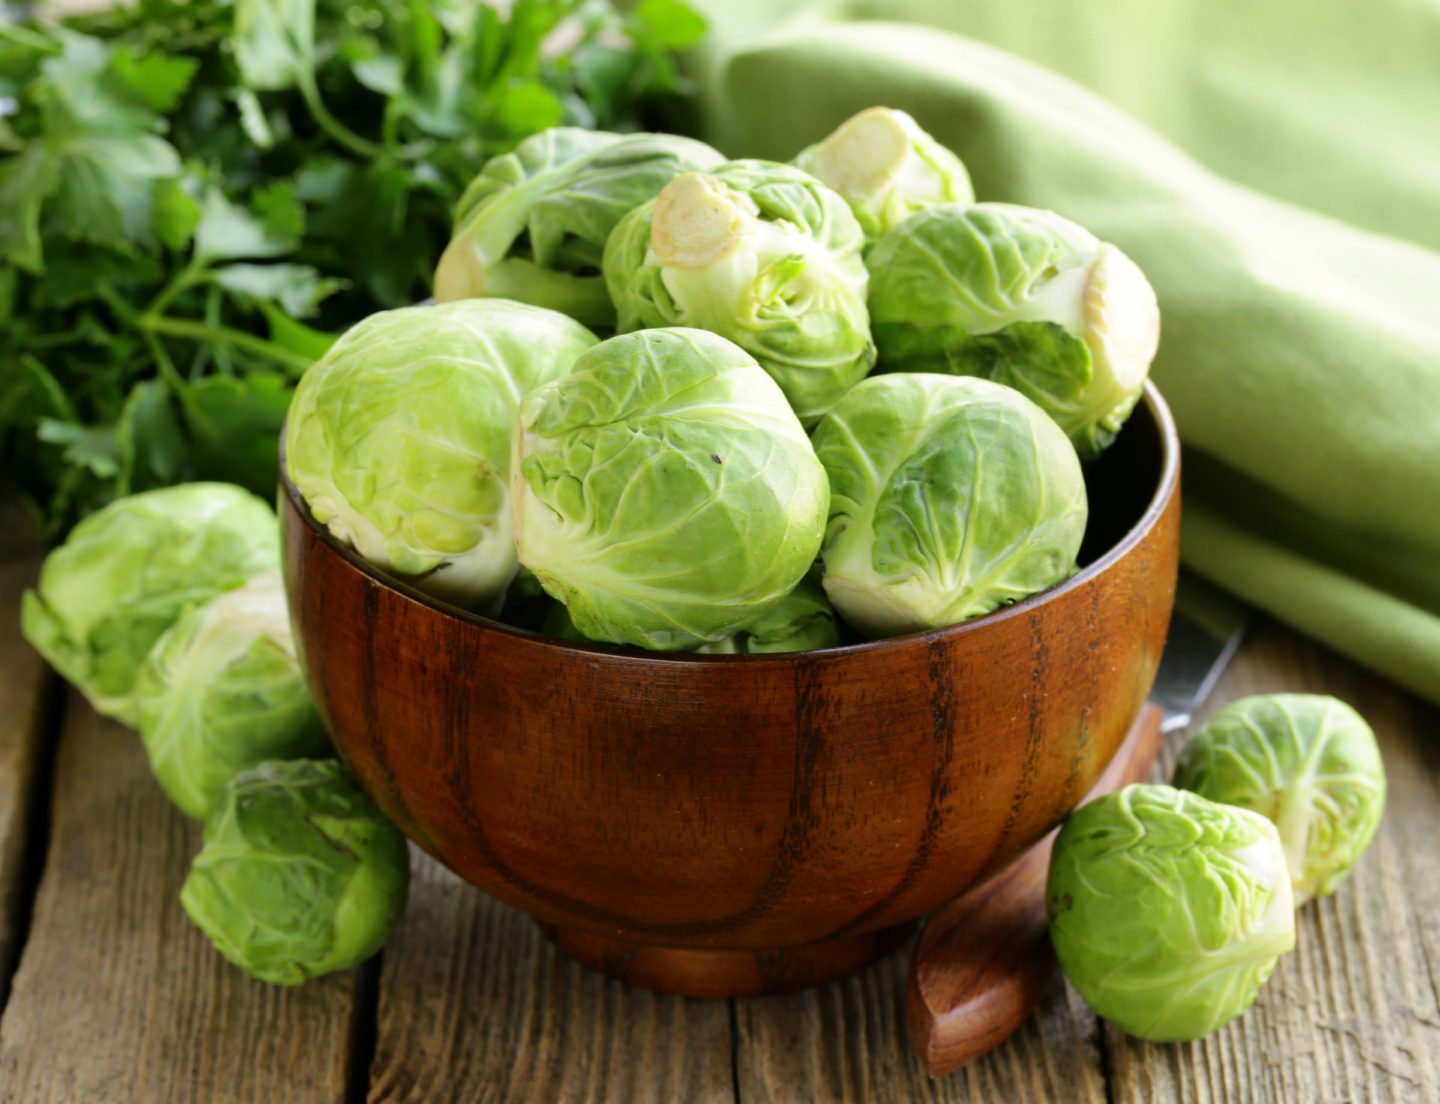 raw brussels sprouts in a wooden bowl